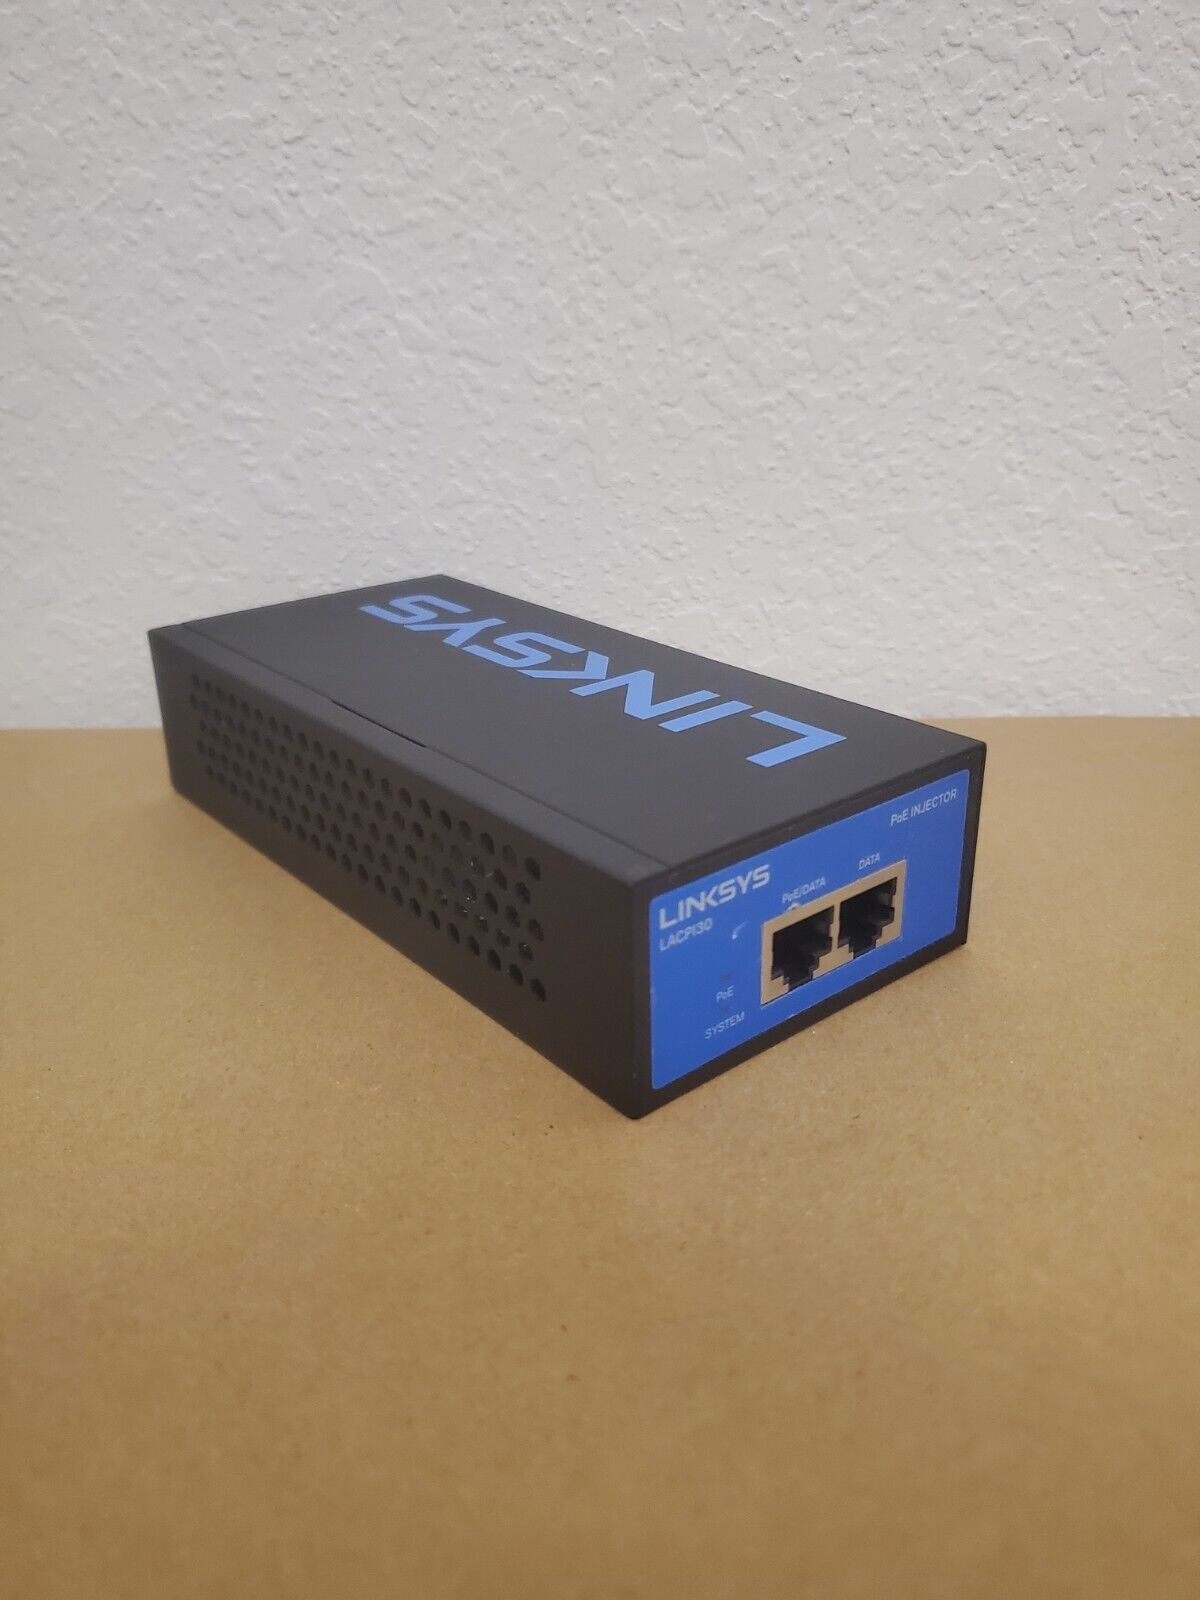 Linksys LACPI30 High Power Gigabit PoE Injector for Business (with PoE of 30W)